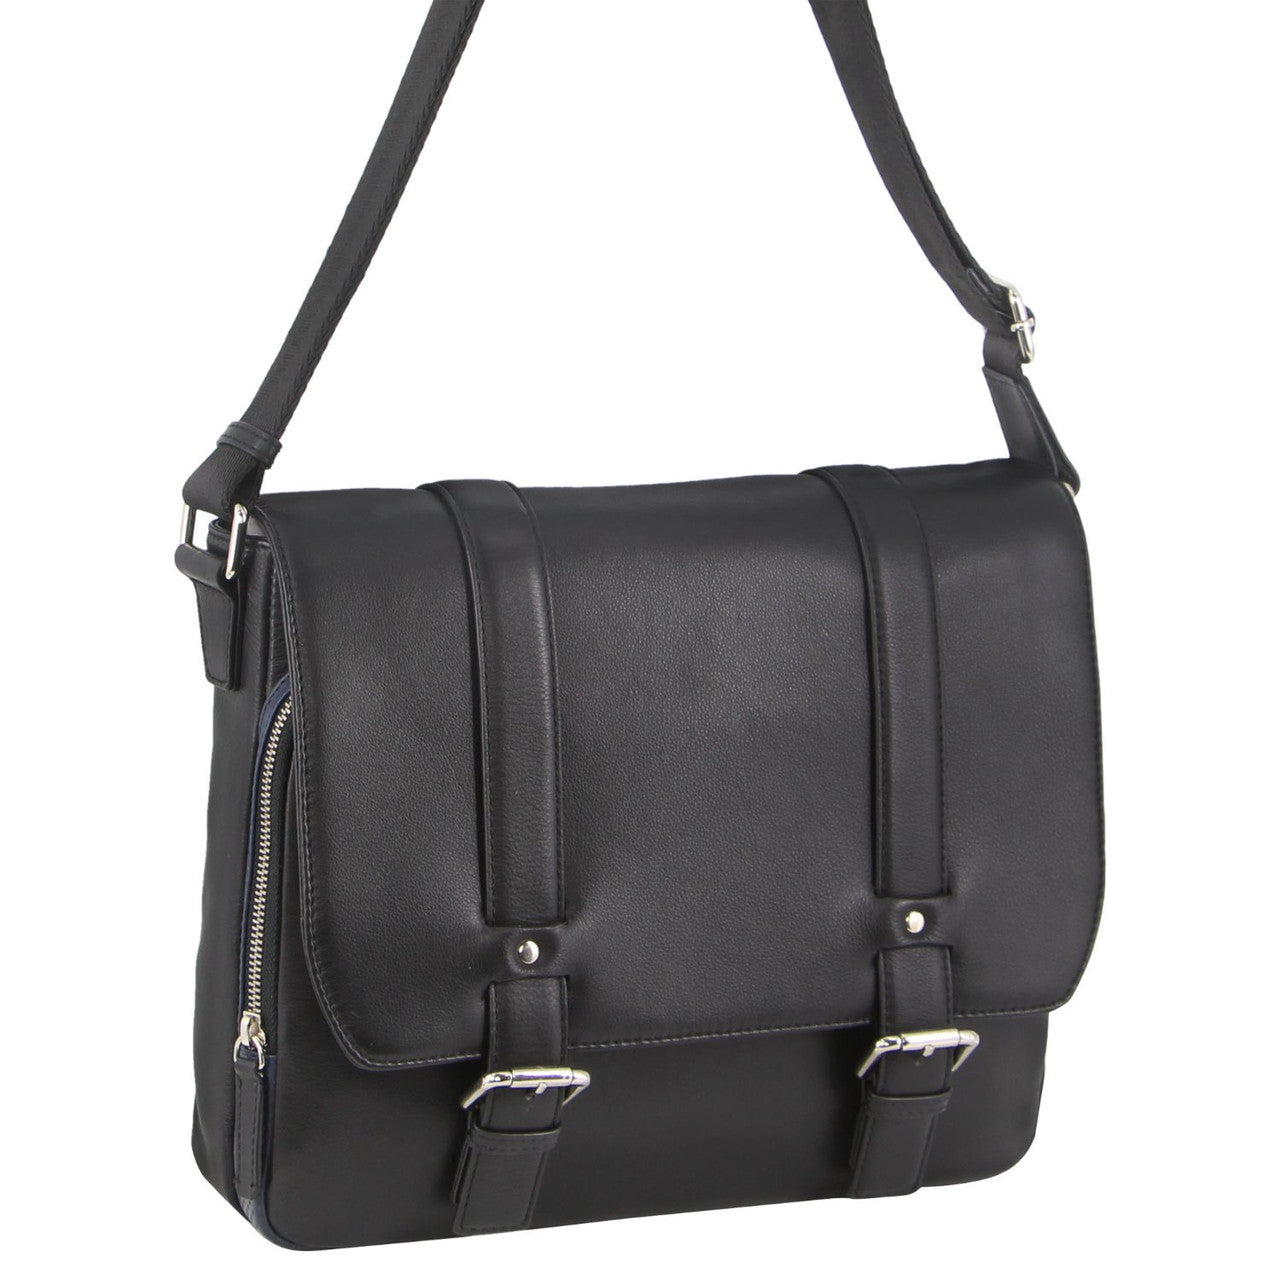 Pierre Cardin Pebbled Leather with perforated design Satchel with flap closure PC3302 Black *DC-1